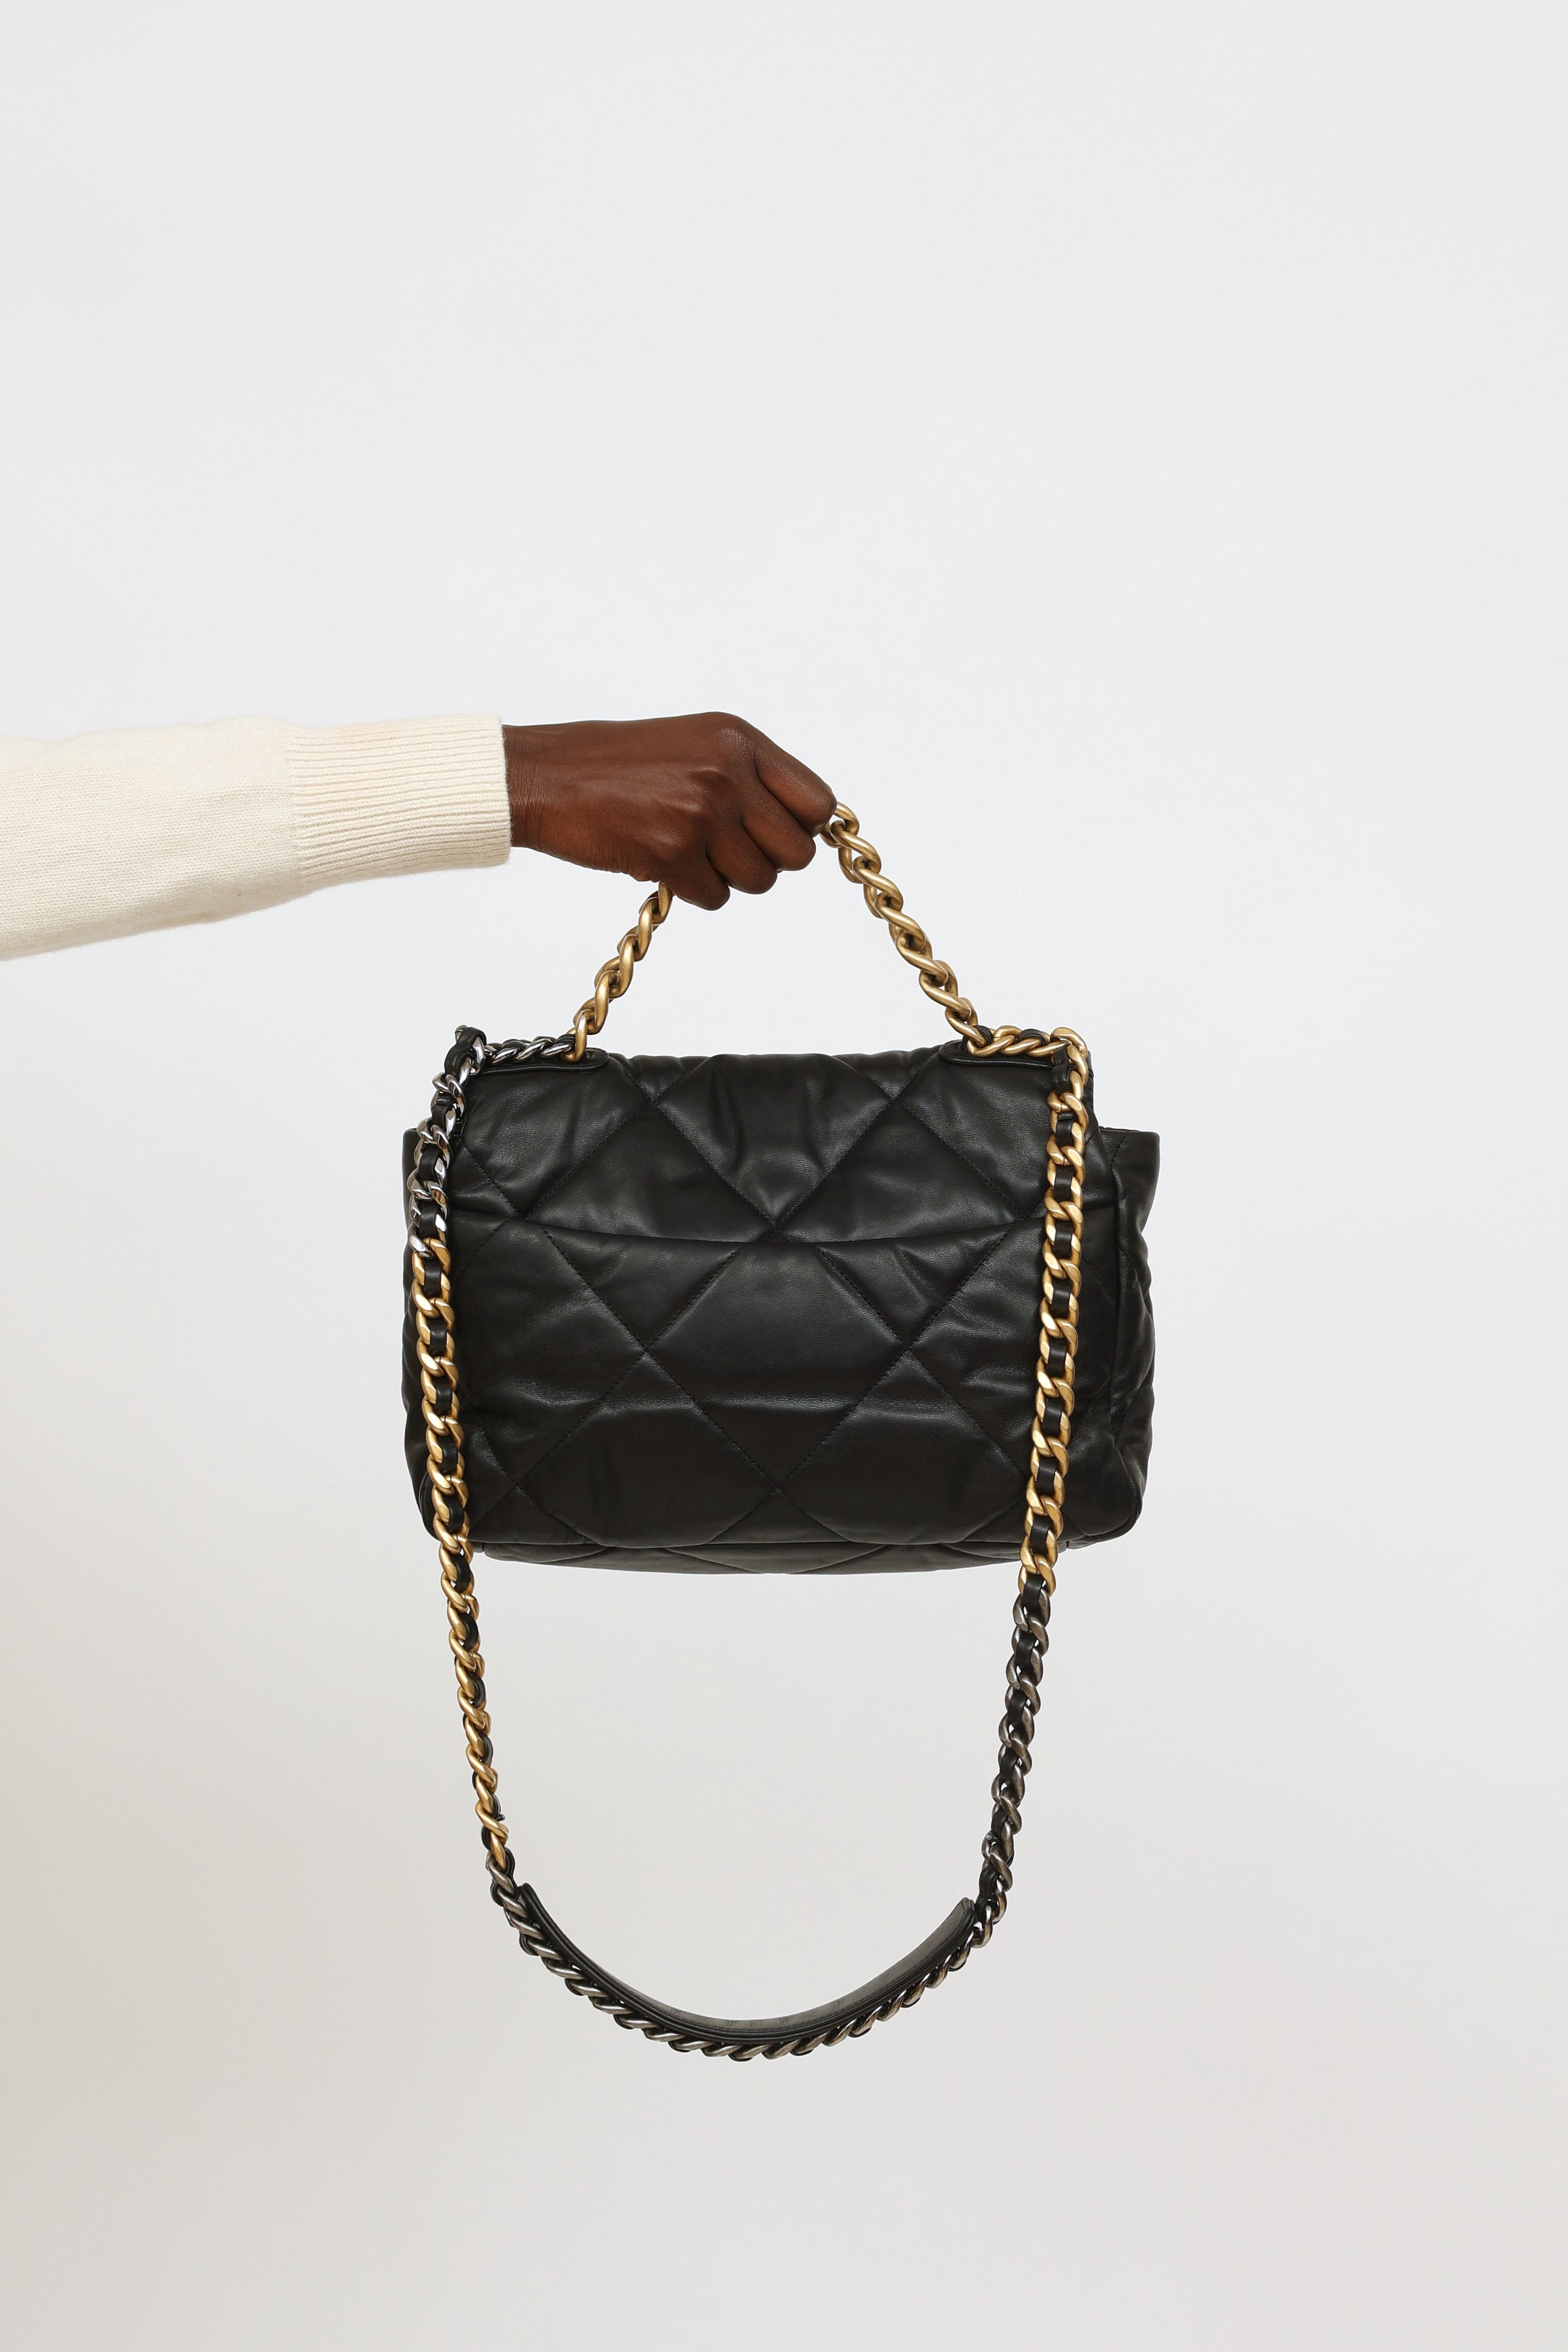 CHANEL Goatskin Quilted Maxi Chanel 19 Flap Black 695037